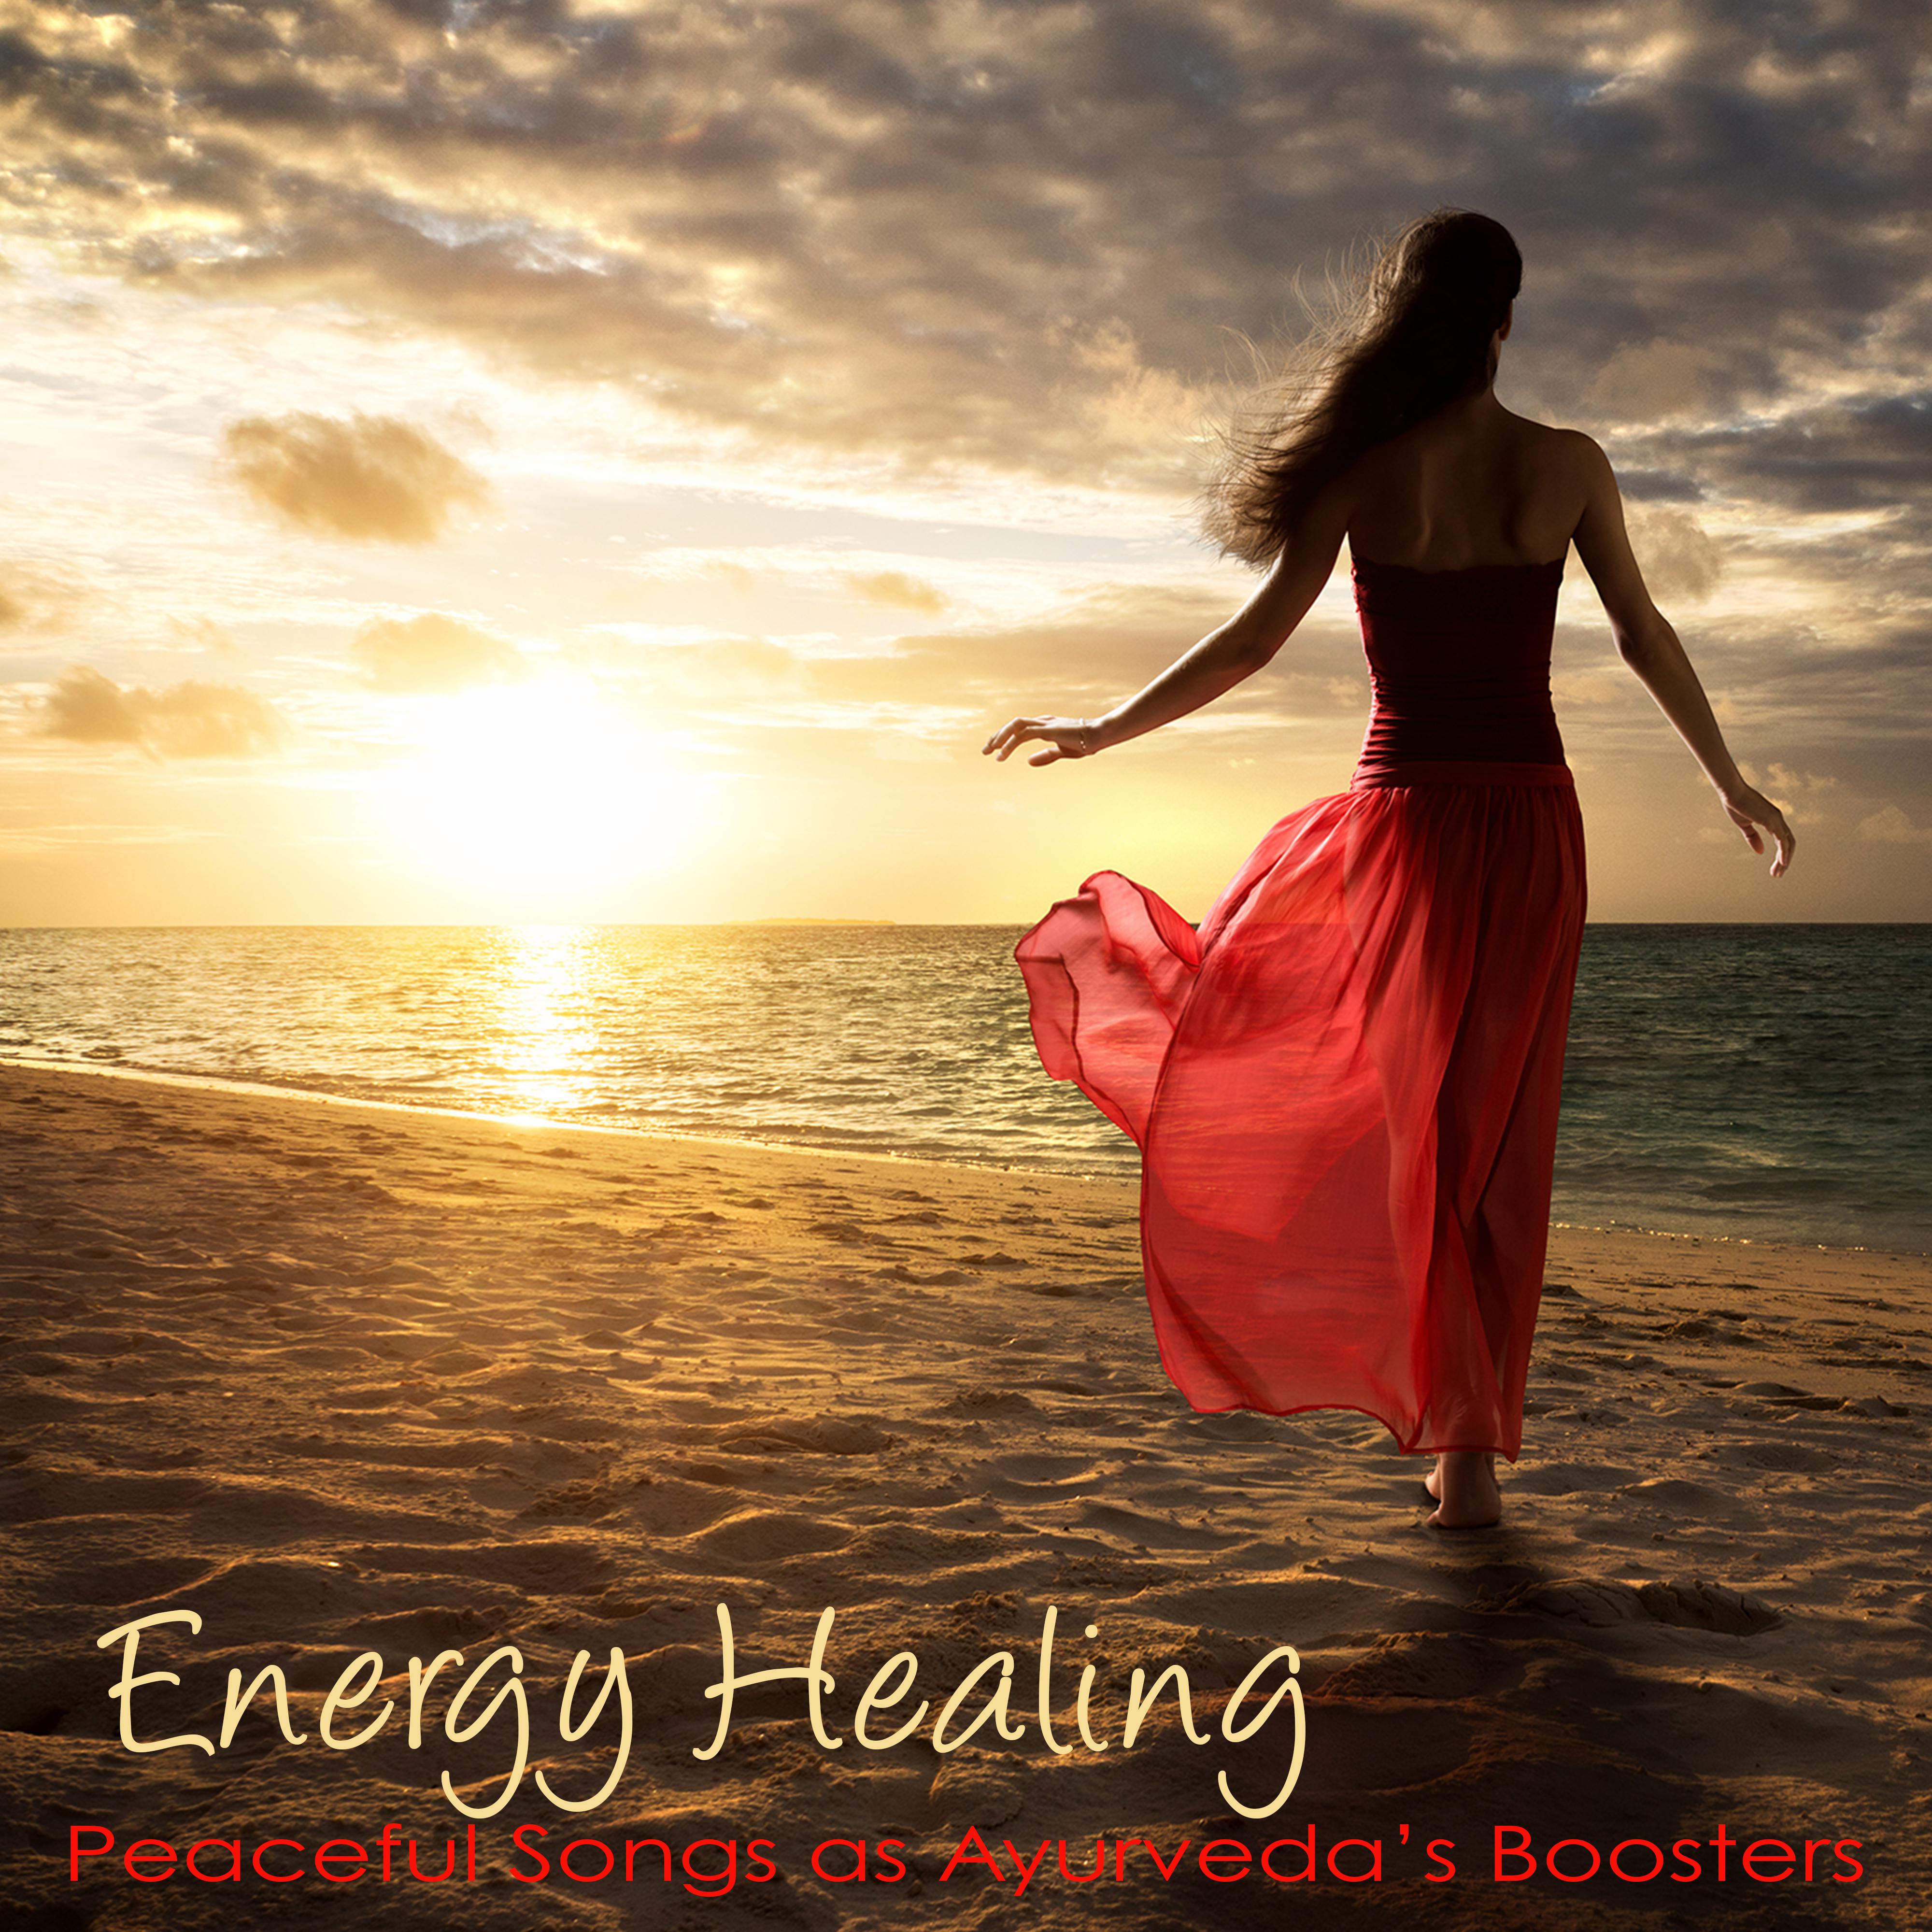 Energy Healing  Peaceful Songs as Ayurveda' s Boosters That Can Give You the Vitality and Inner Strength You Need to Live a Truly Productive, Joyful Life